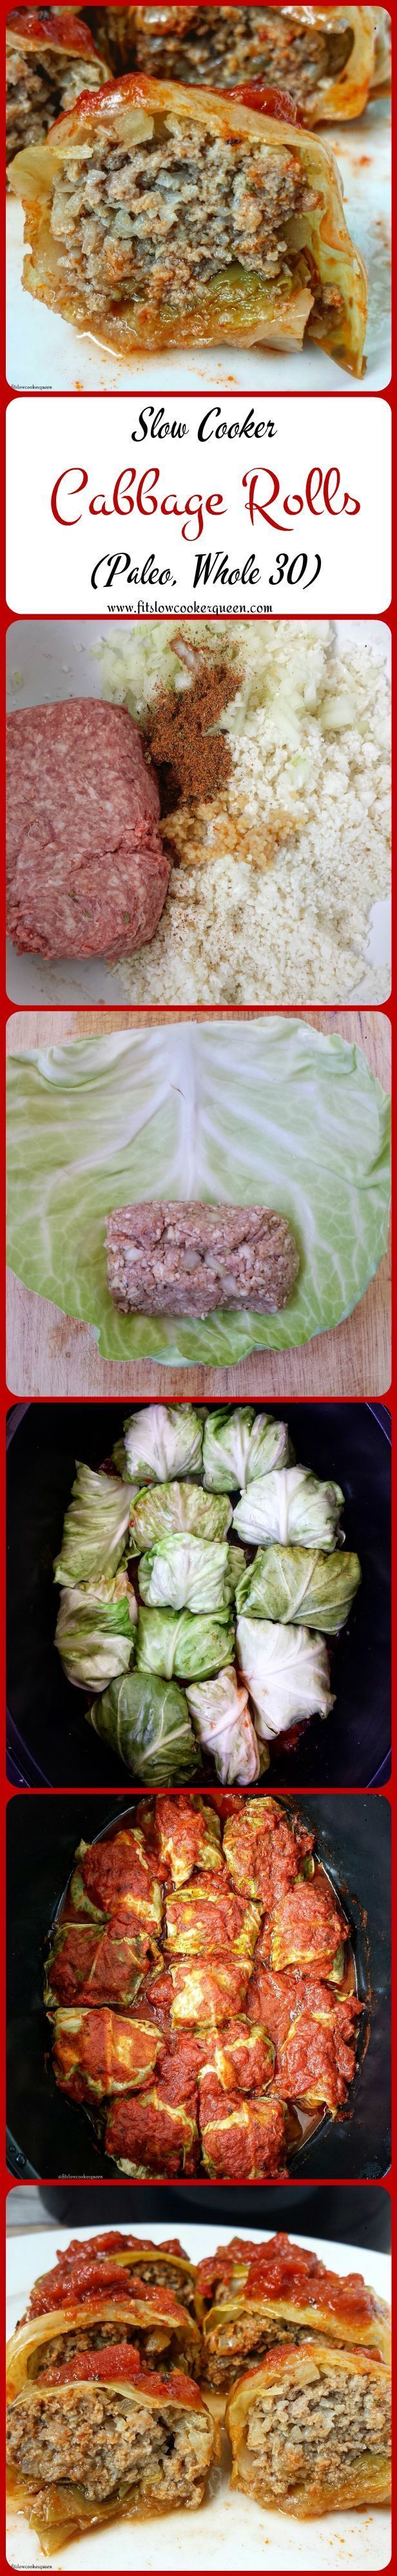 This healthy, low-carb, paleo, and whole 30 compliant slow cooker version of cabbage rolls is easy to make and perfect to serve